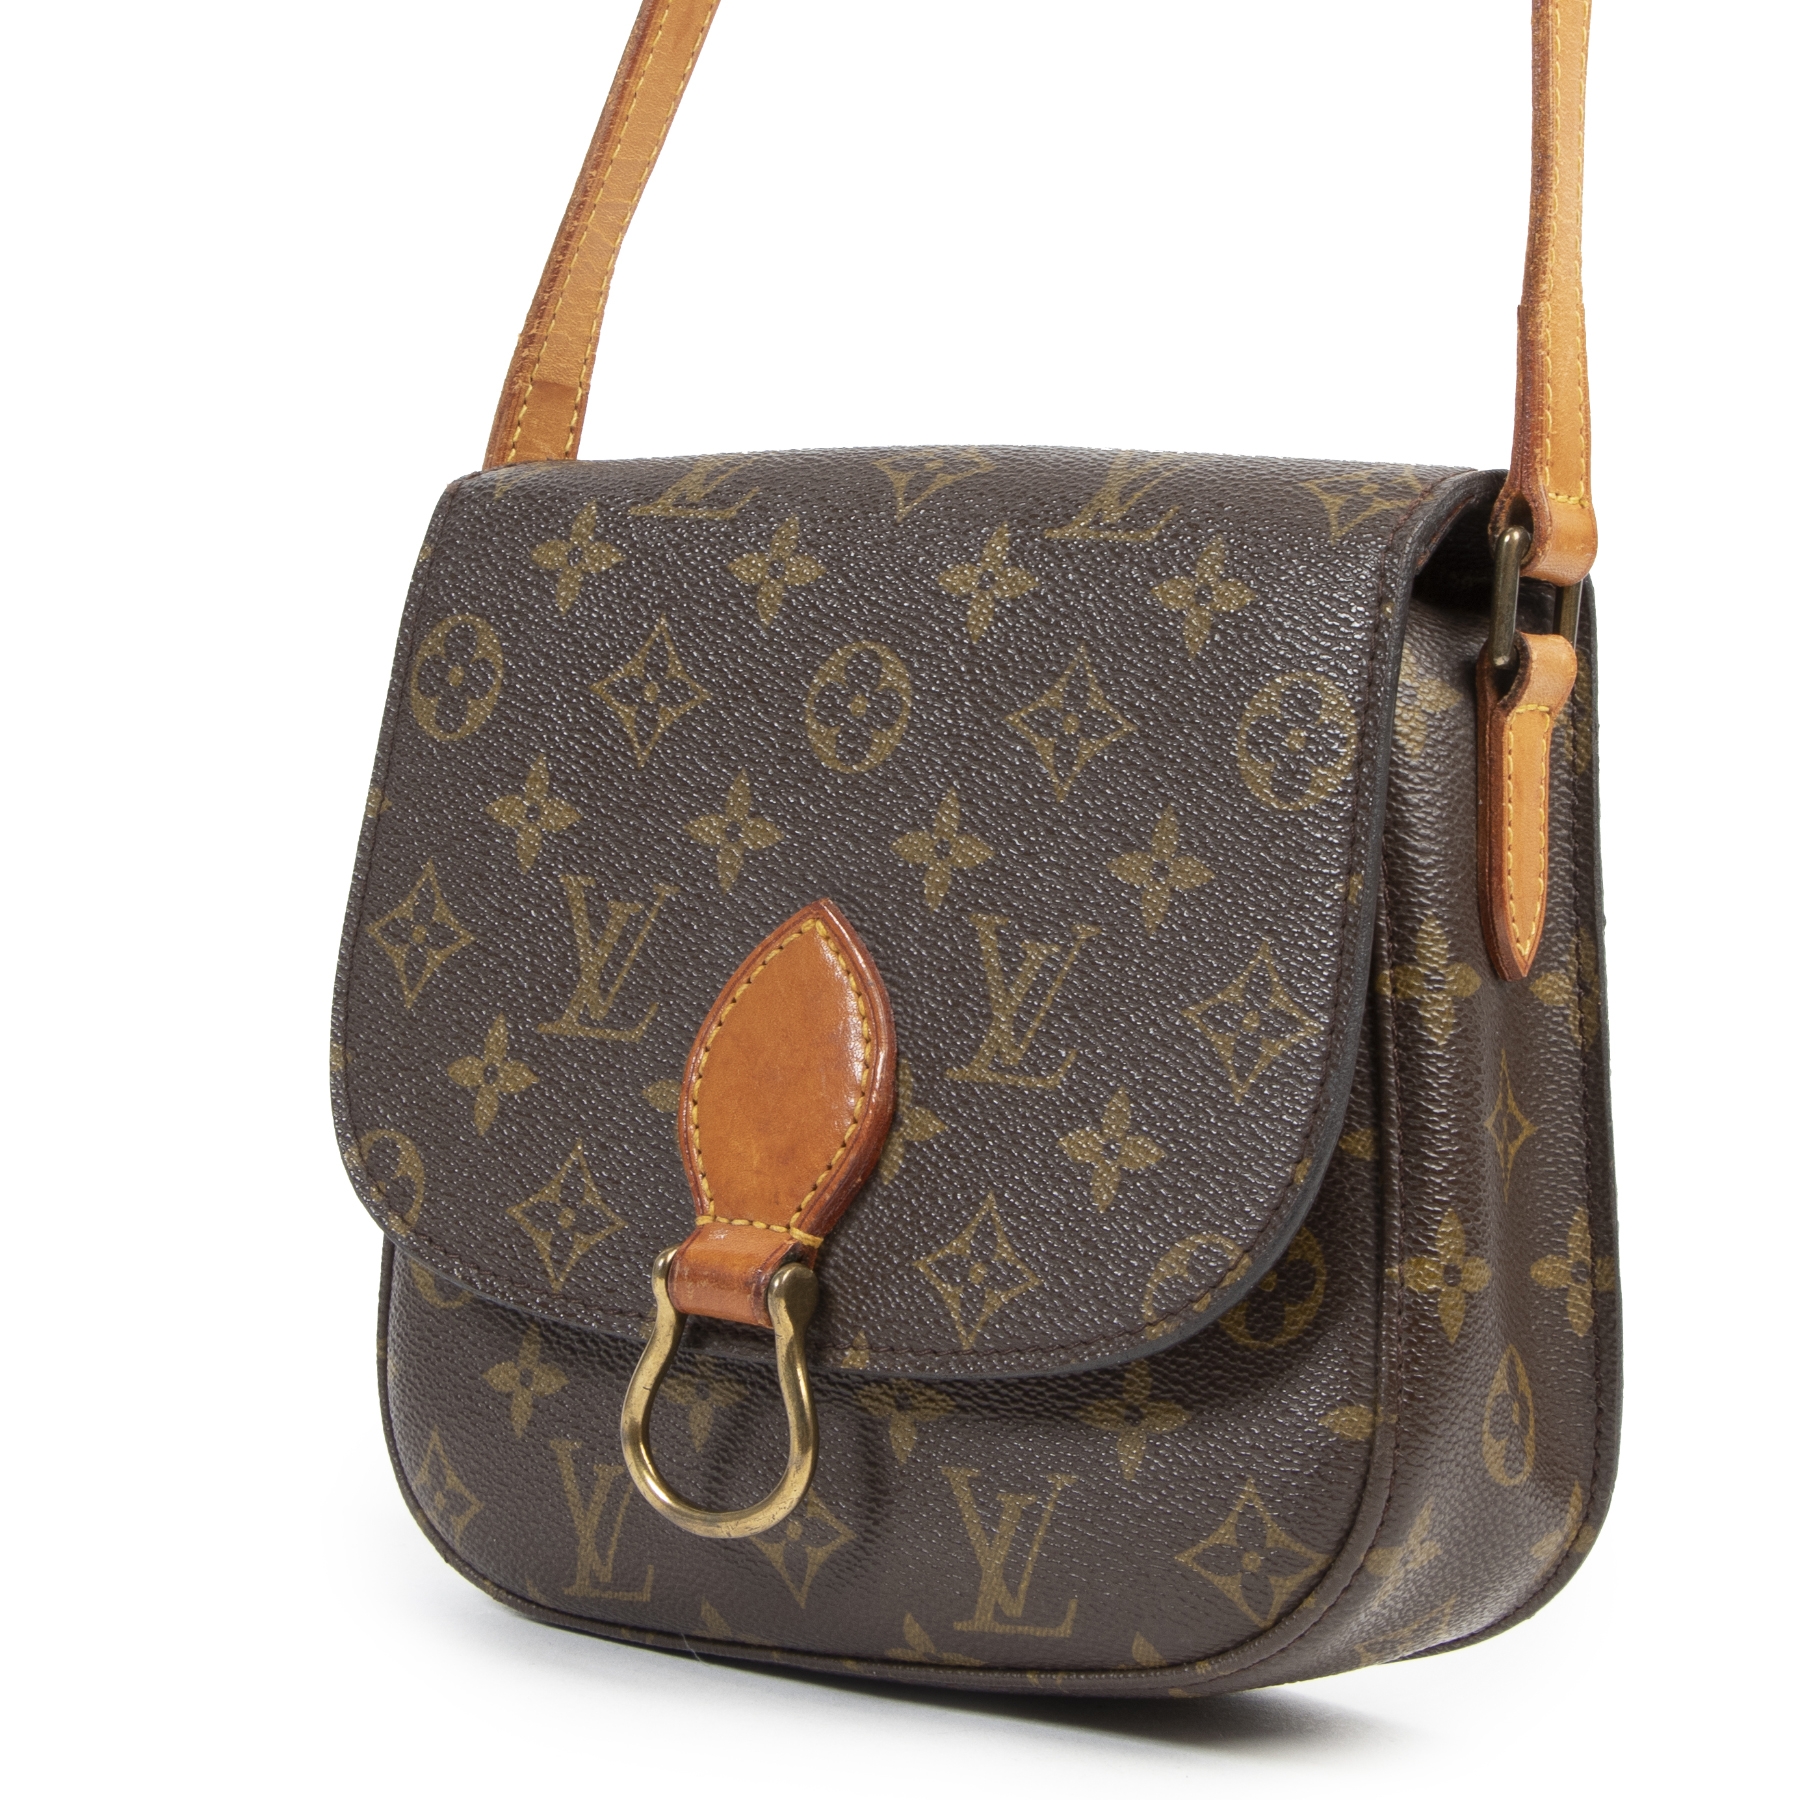 Buy Free Shipping Authentic Pre-owned Louis Vuitton Monogram Vintage Saint-cloud  Gm Crossbody Bag M51242 200370 from Japan - Buy authentic Plus exclusive  items from Japan